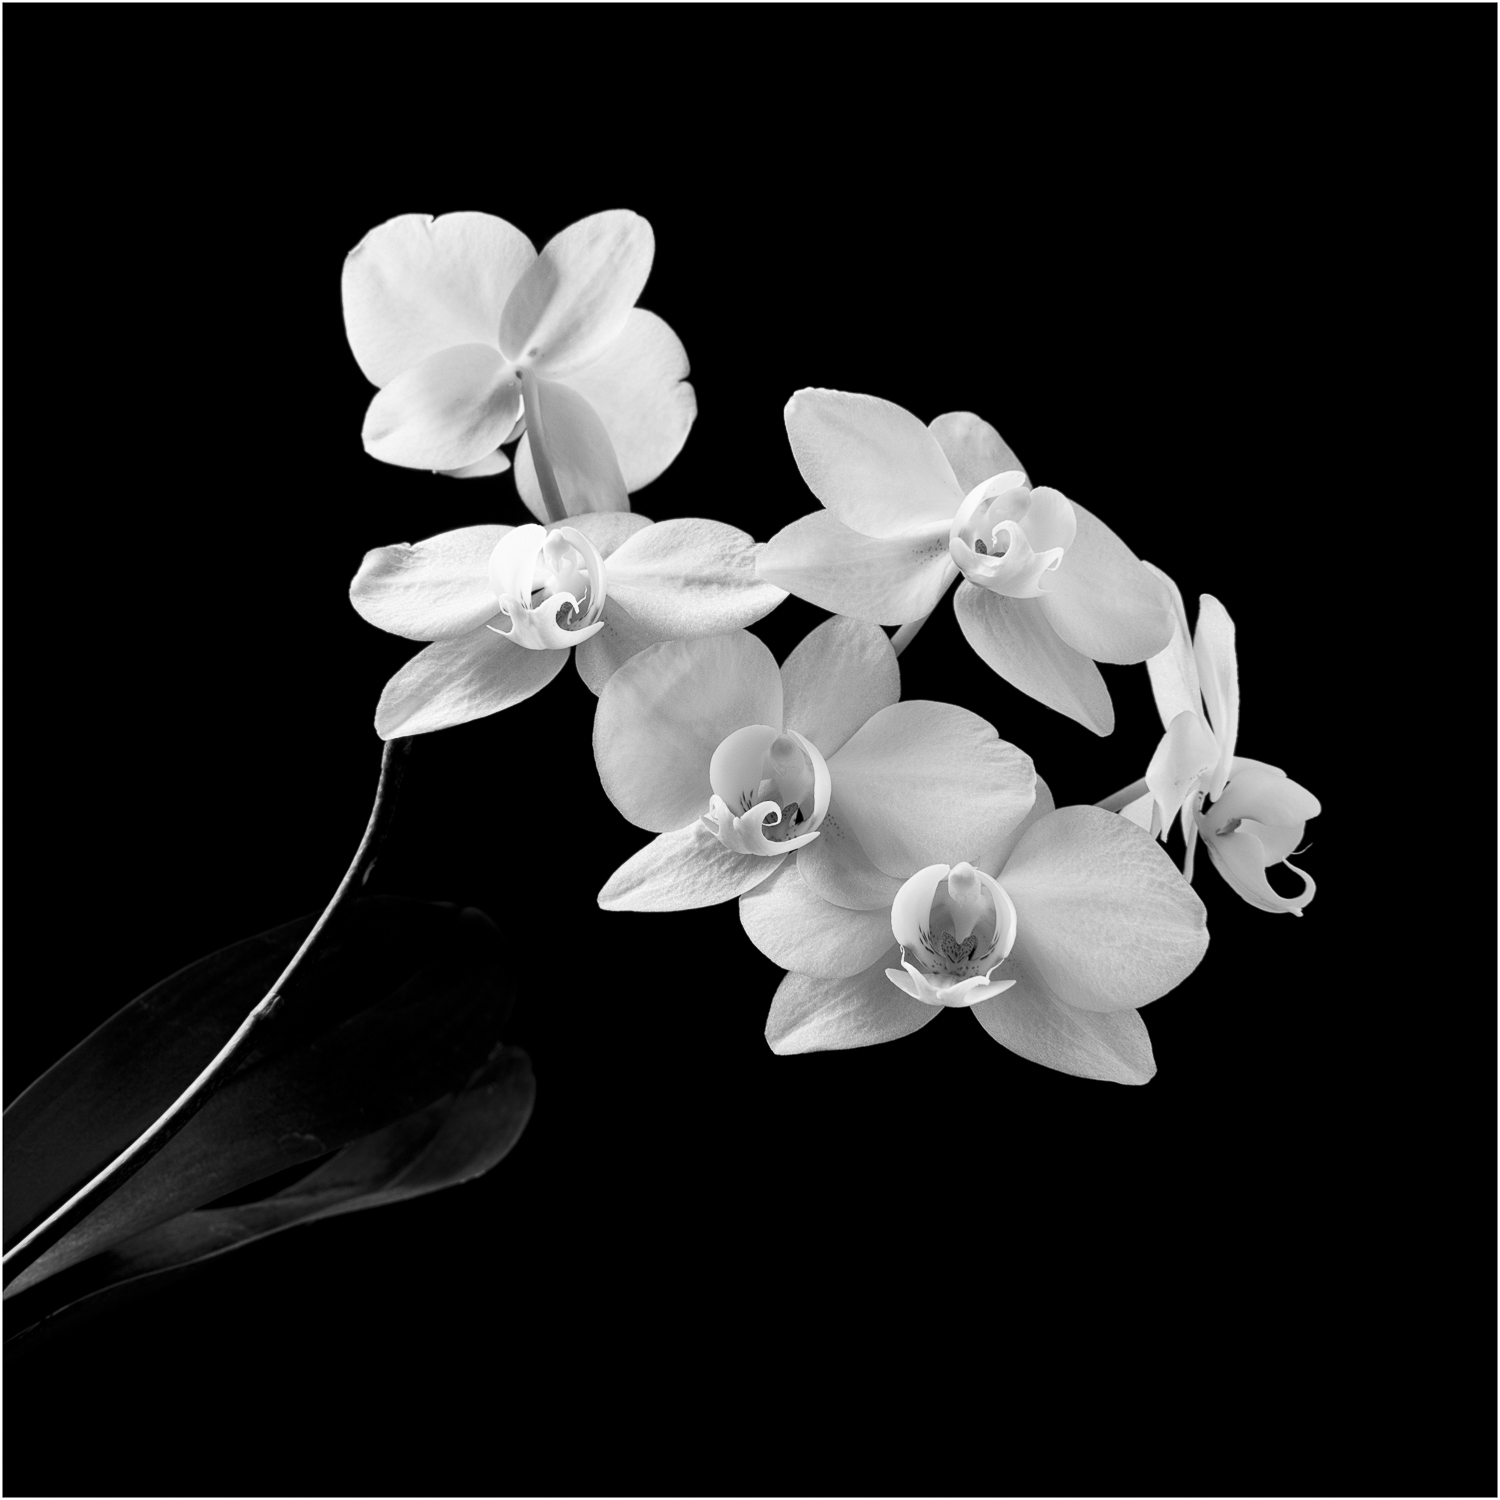 Orchid in style of Robert Mapplethorpe